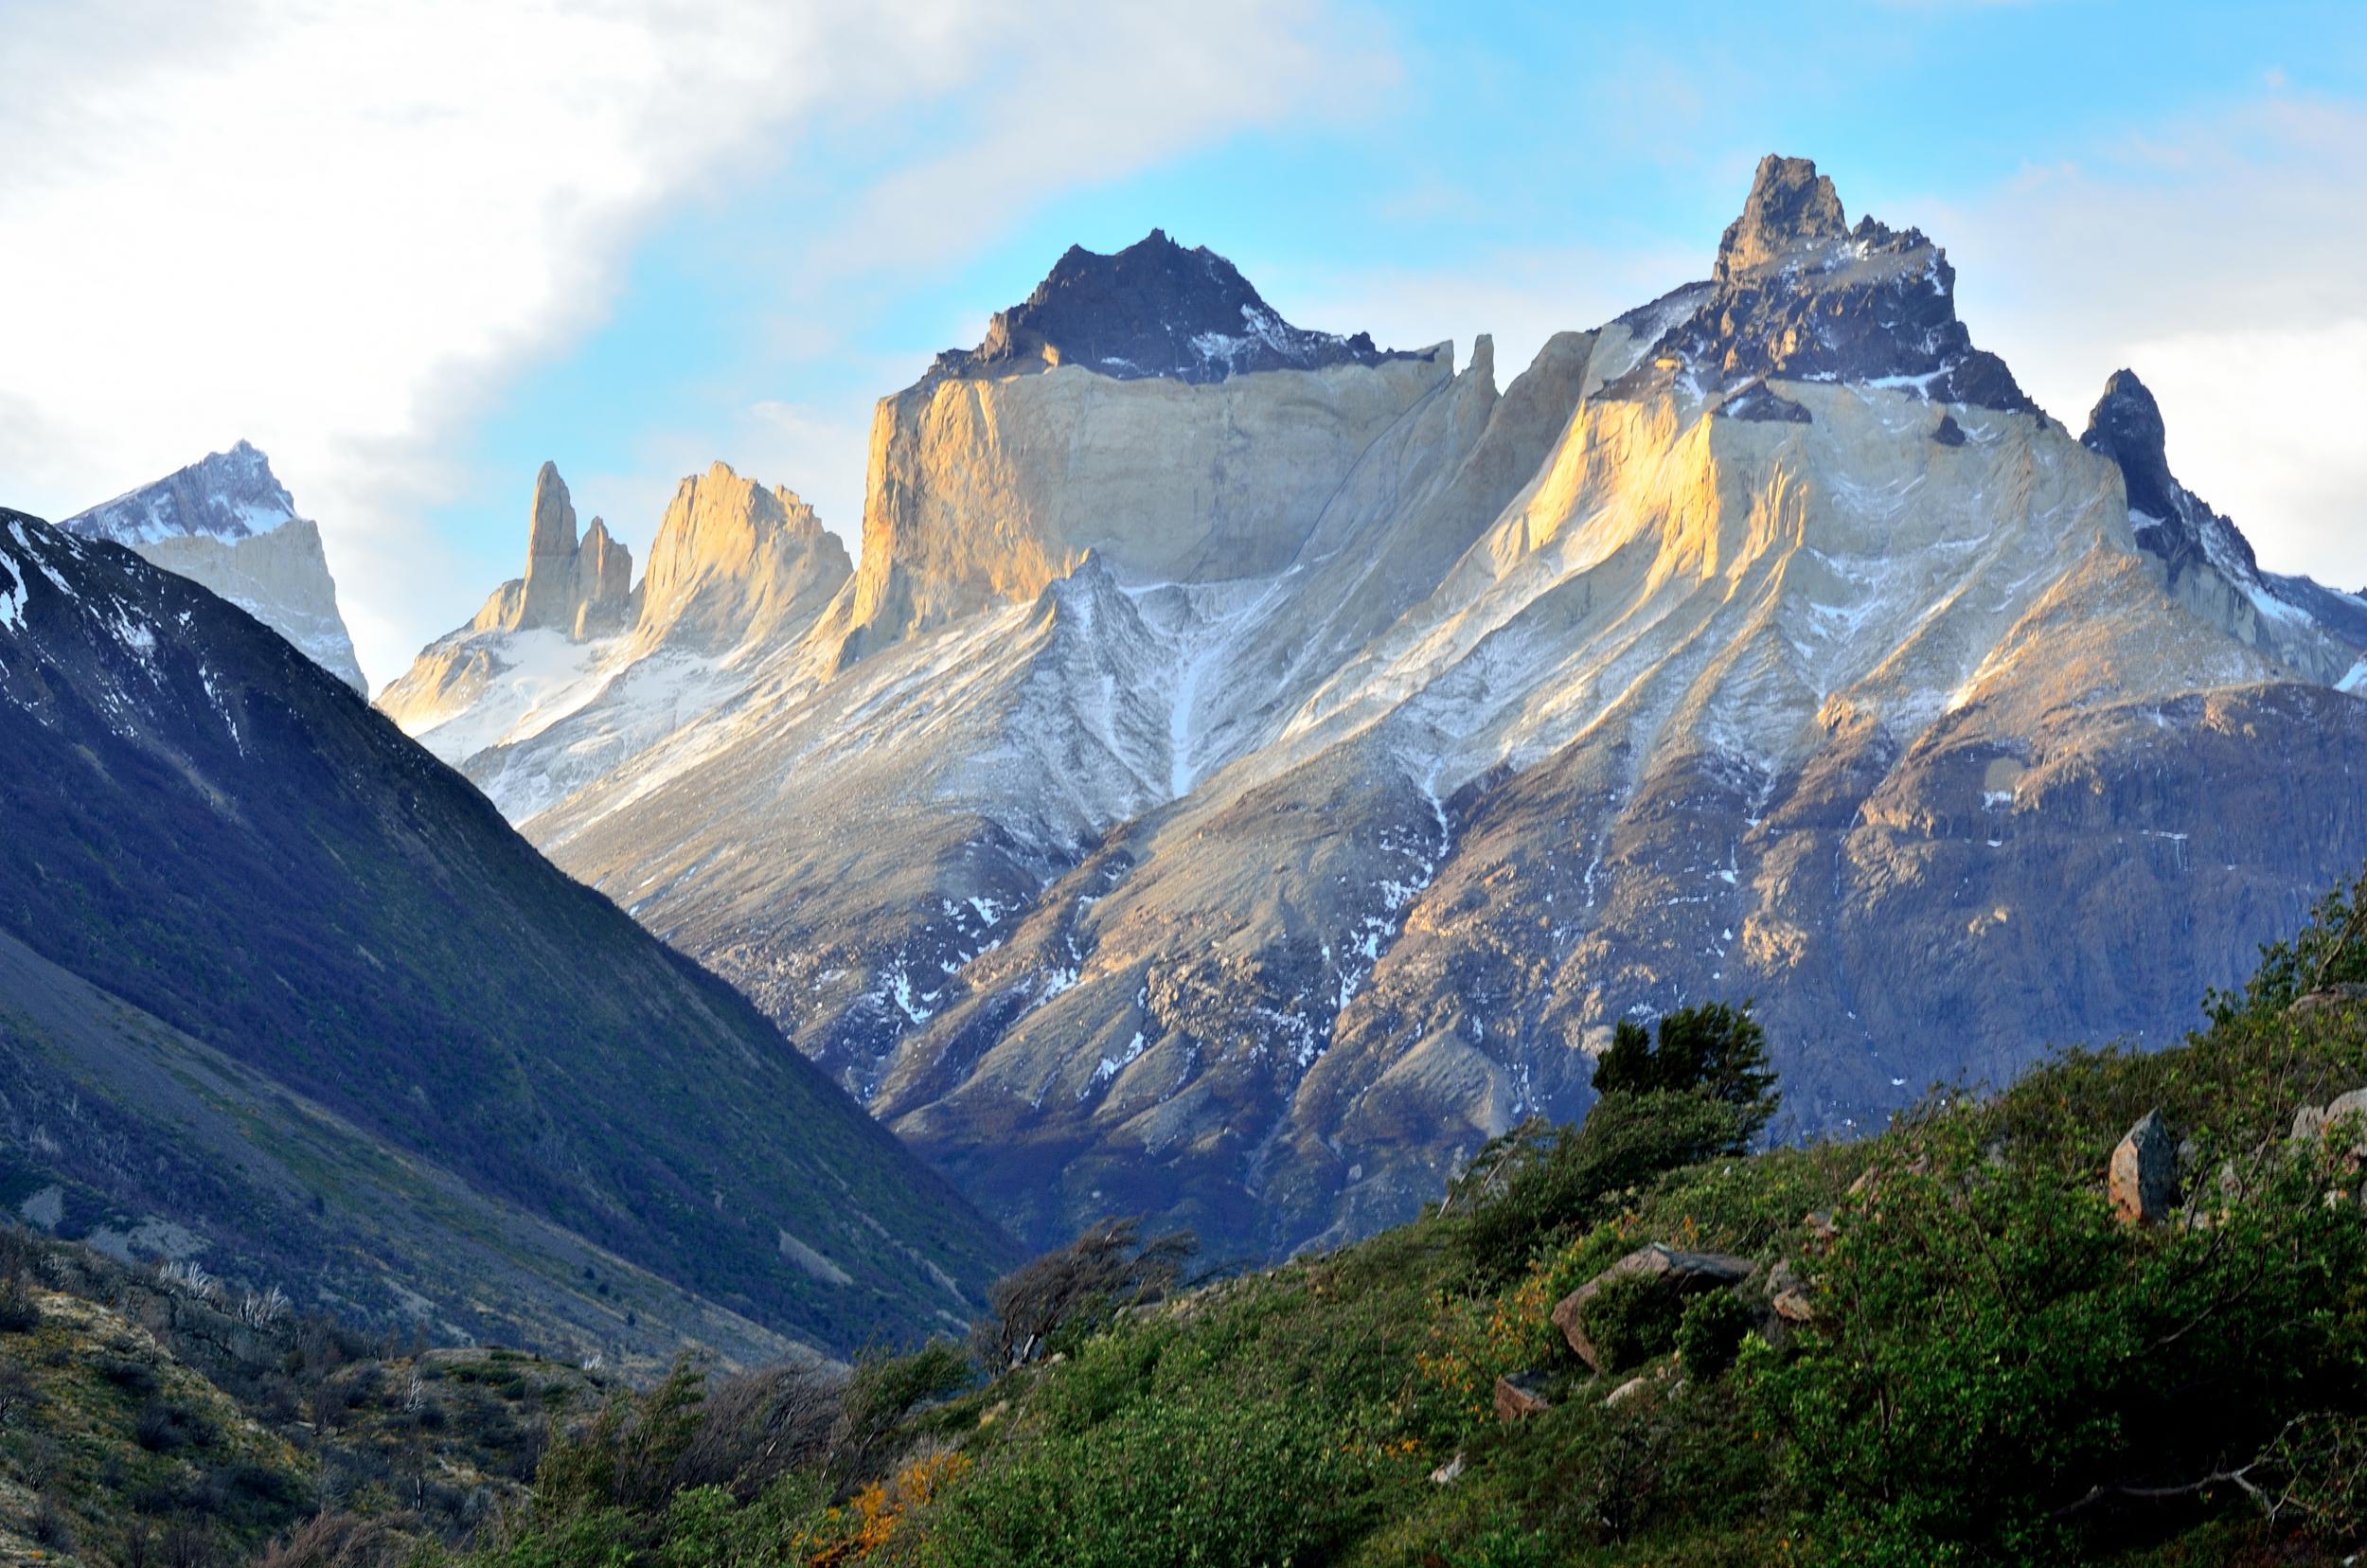 Torres del Paine National Park is not for the faint-hearted